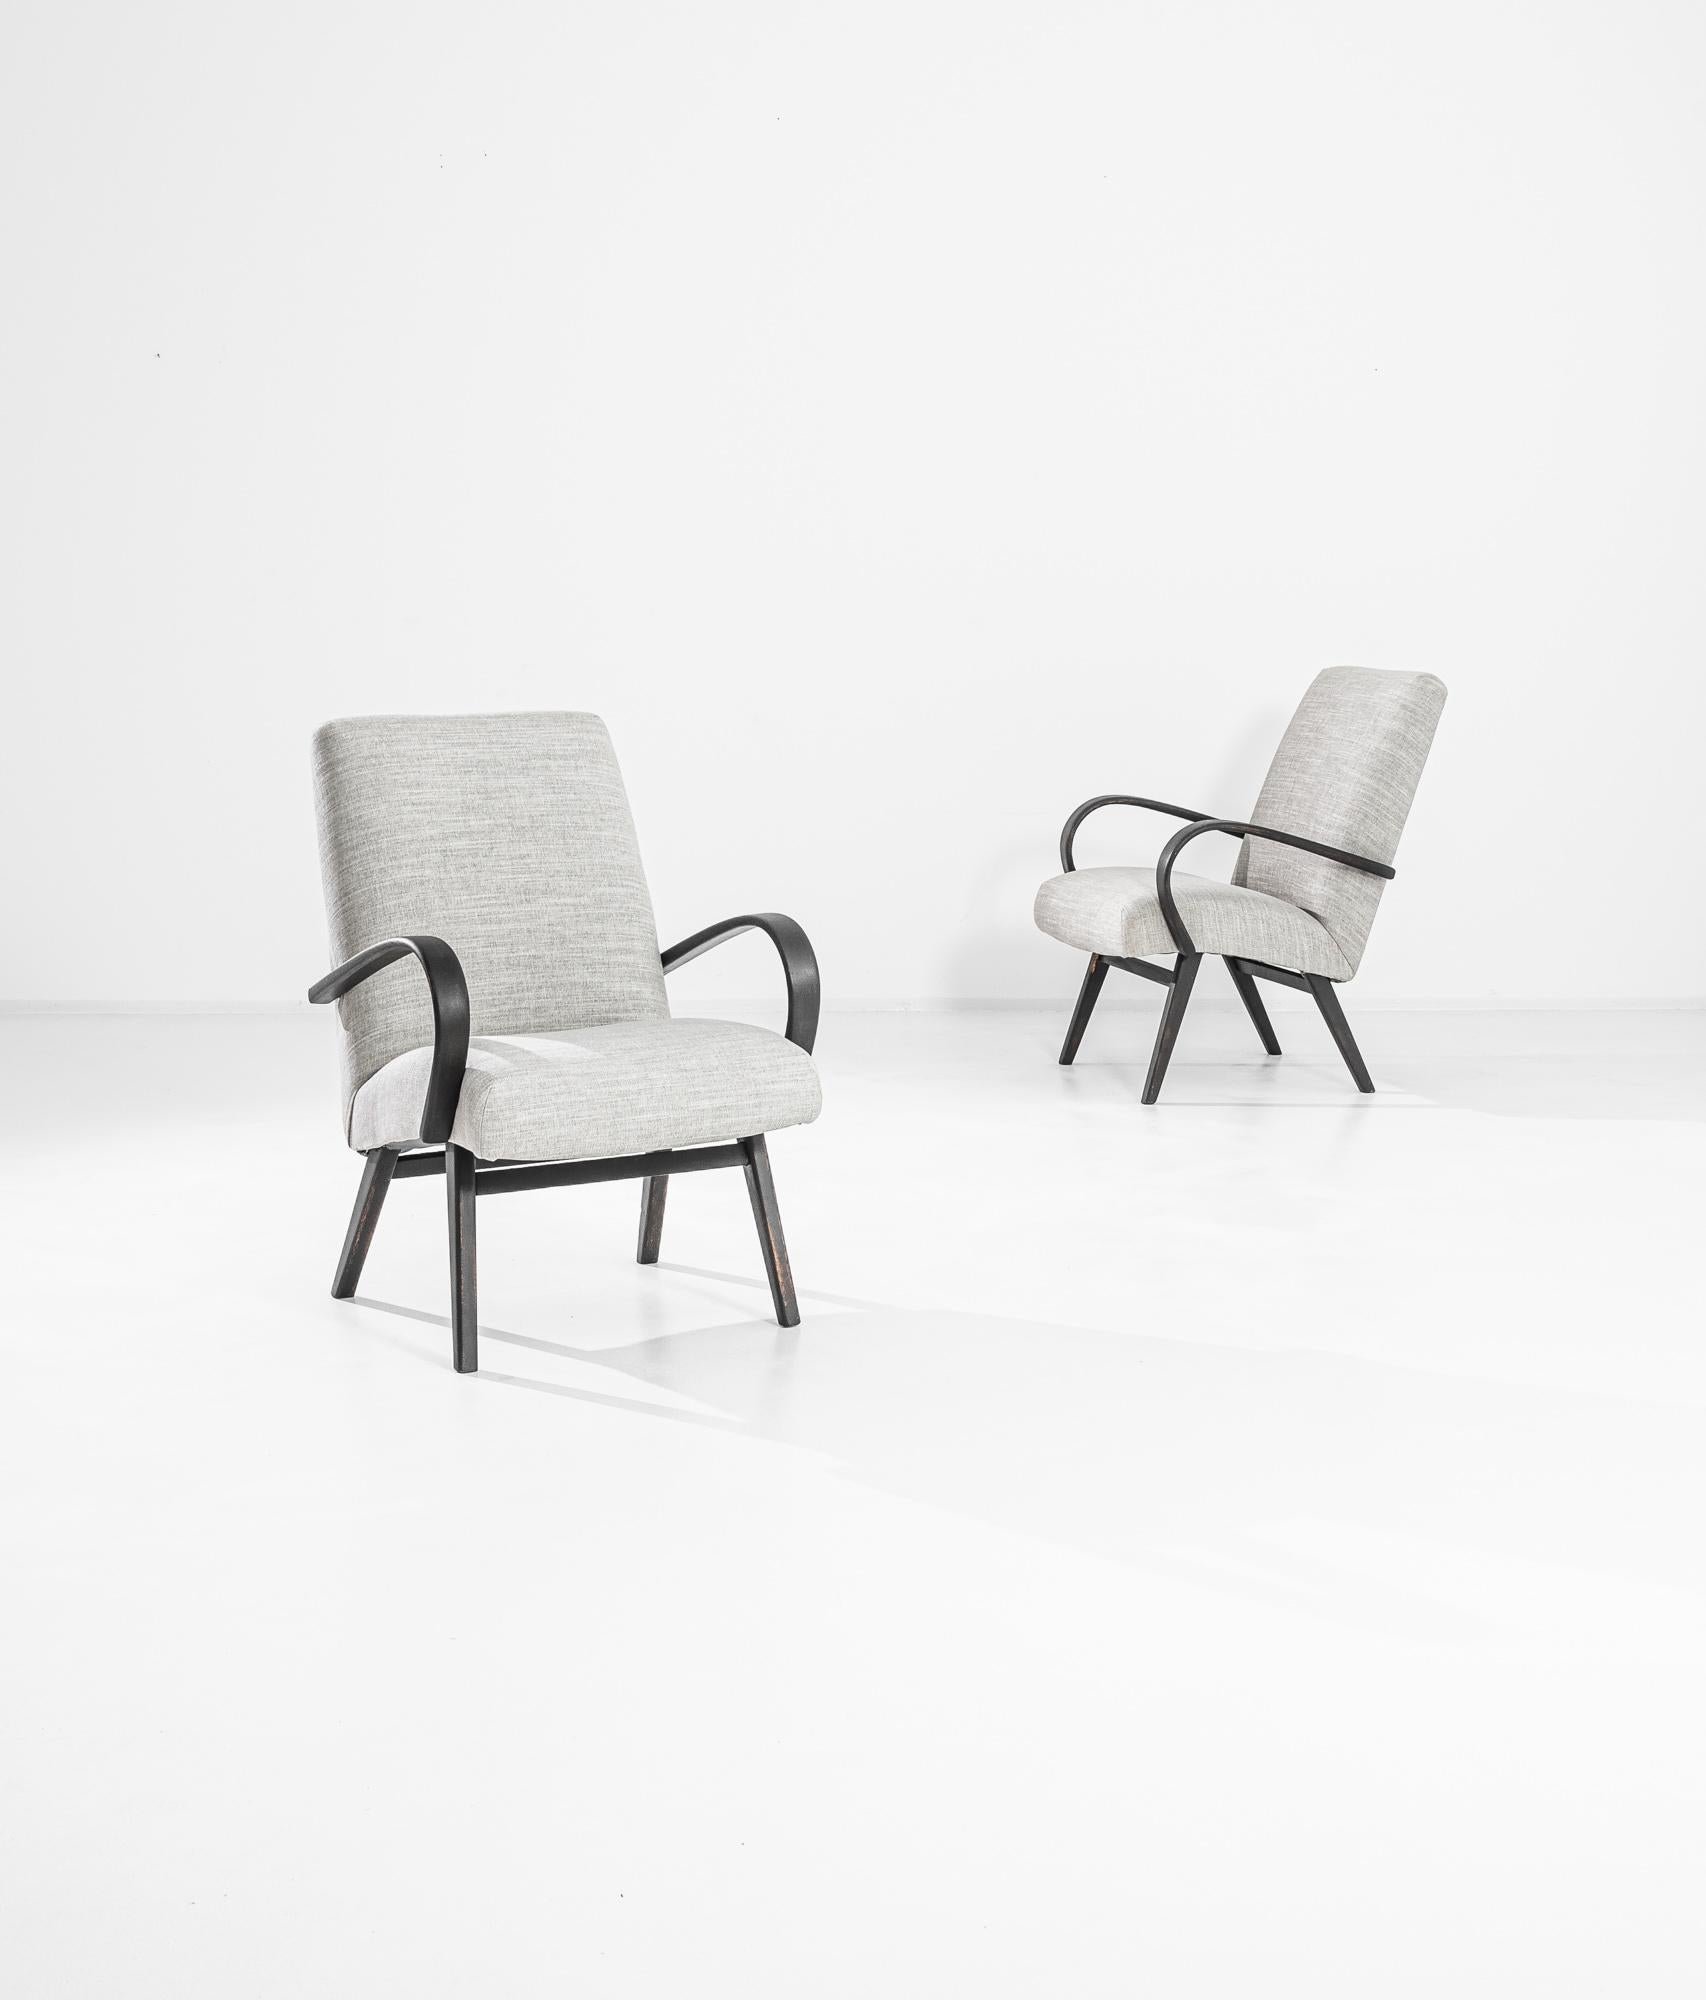 A pair of armchairs by Czech furniture designer Jindrich Halabala. This 1950s design is upholstered in an updated beige fabric, the soothing earth tone was chosen to compliment the textured black of the hardwood frame. Influenced by Modern and Art